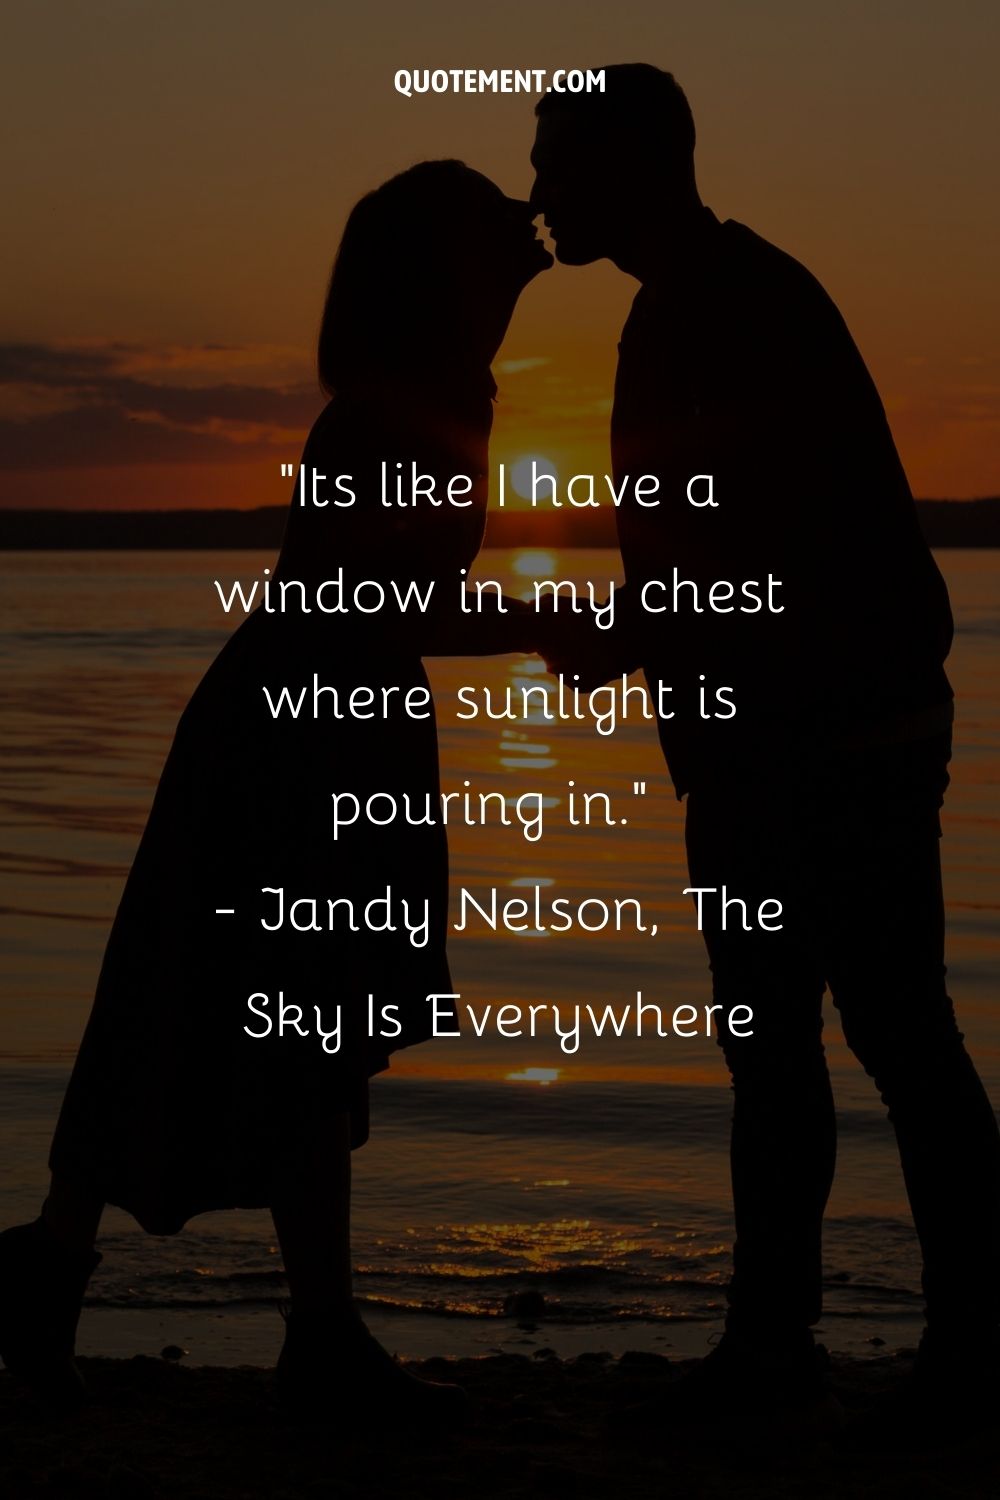 Its like I have a window in my chest where sunlight is pouring in.